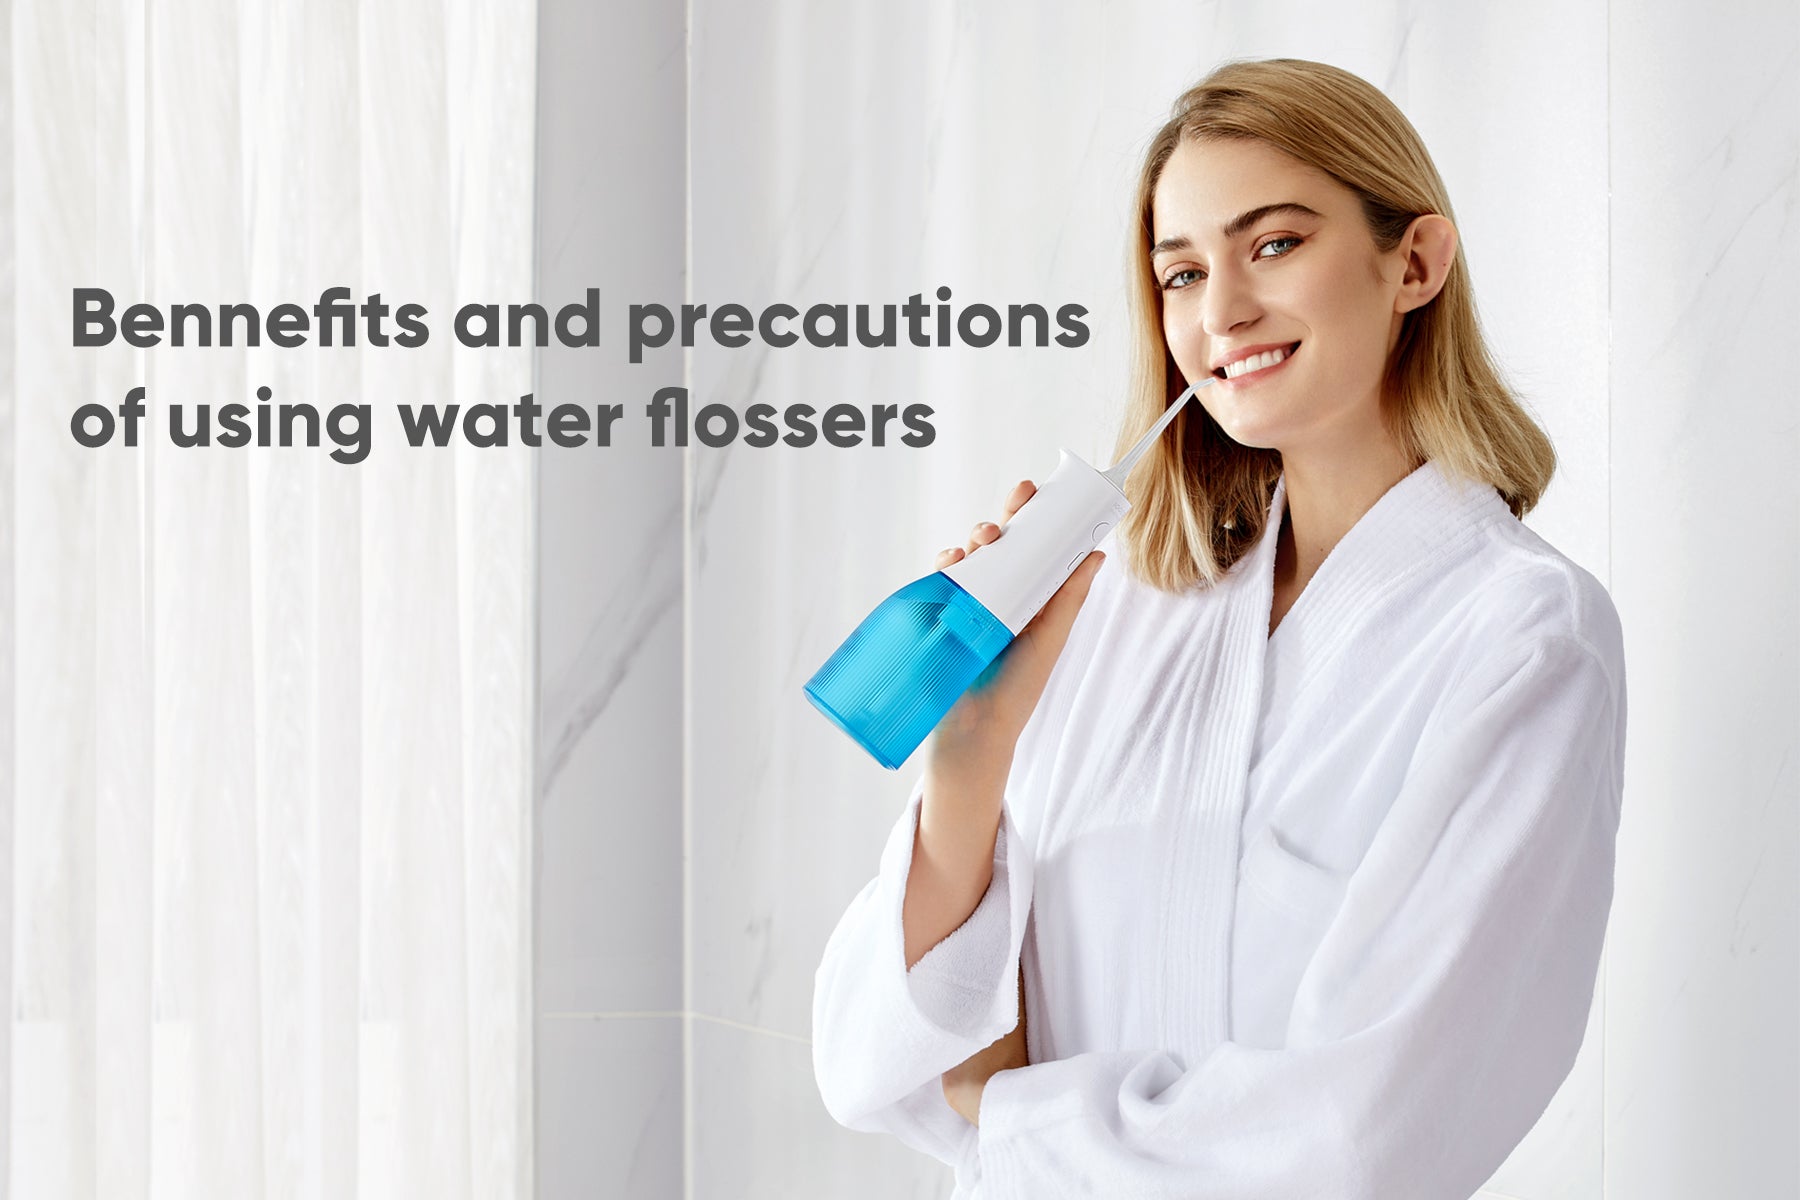 Benefits and precautions of using water flossers